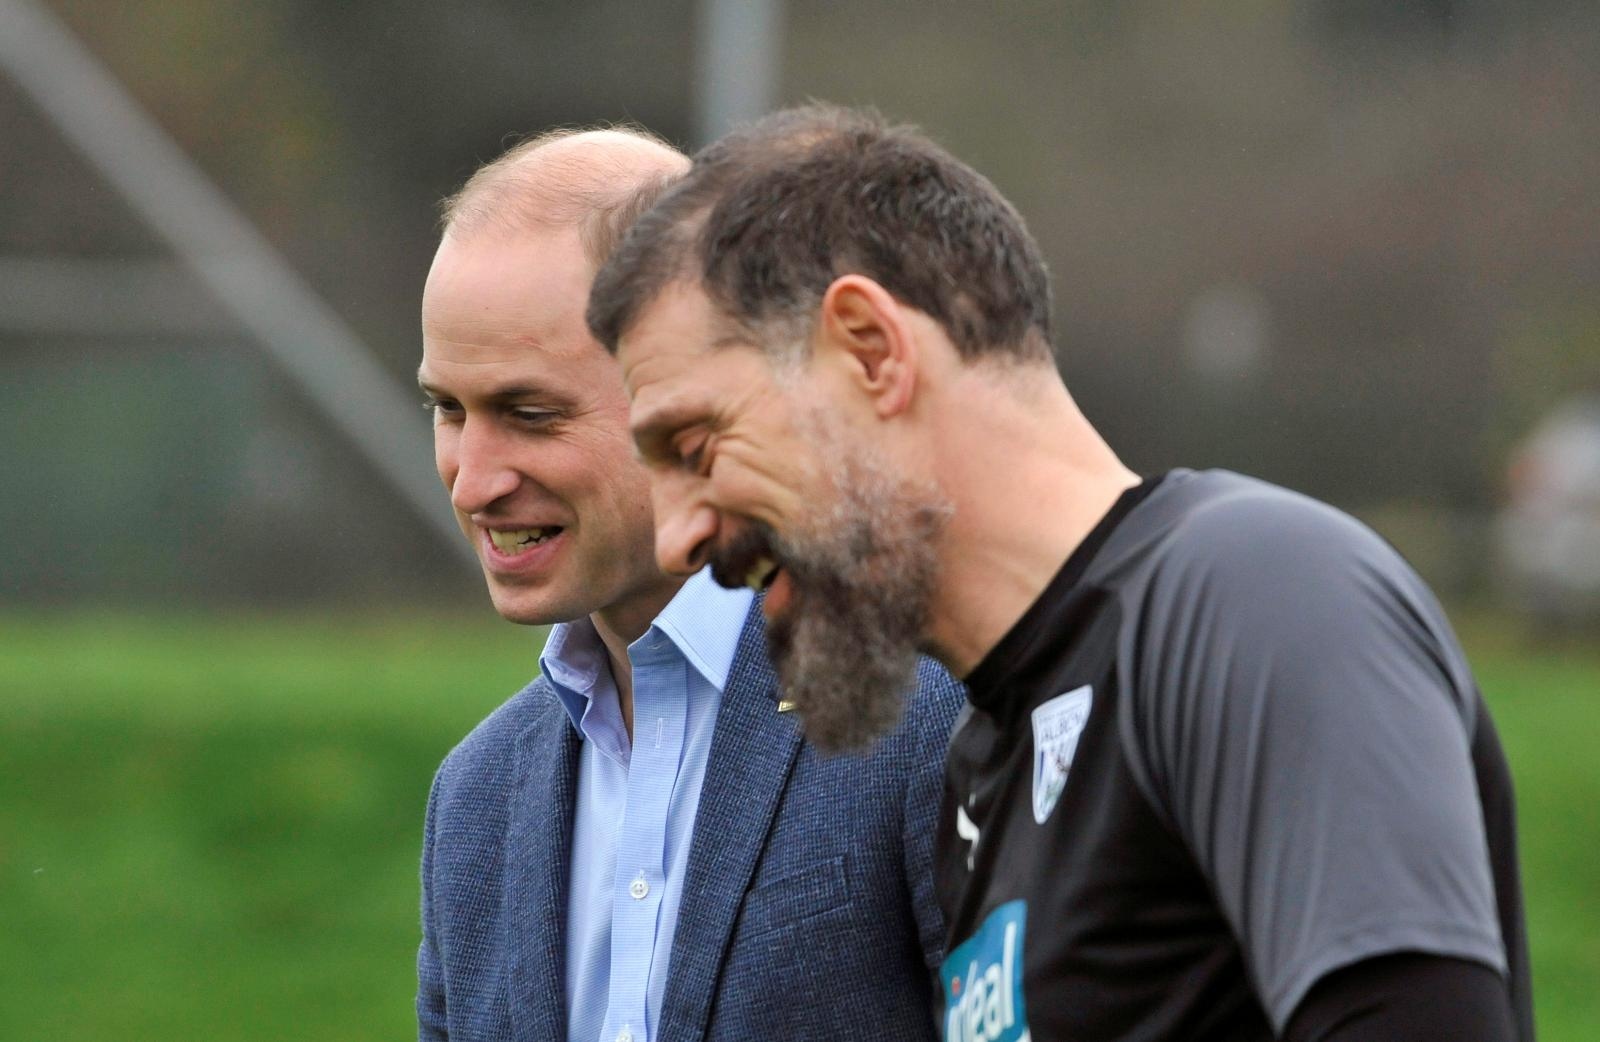 Britain's Prince William meets soccer players in Walsall Britain's Prince William meets soccer coach Slaven Bilic during a visit to West Bromwich Albion Training Ground as part of the Heads Up campaign in Walsall, Britain November 28, 2019. Rui Vieira/Pool via REUTERS POOL